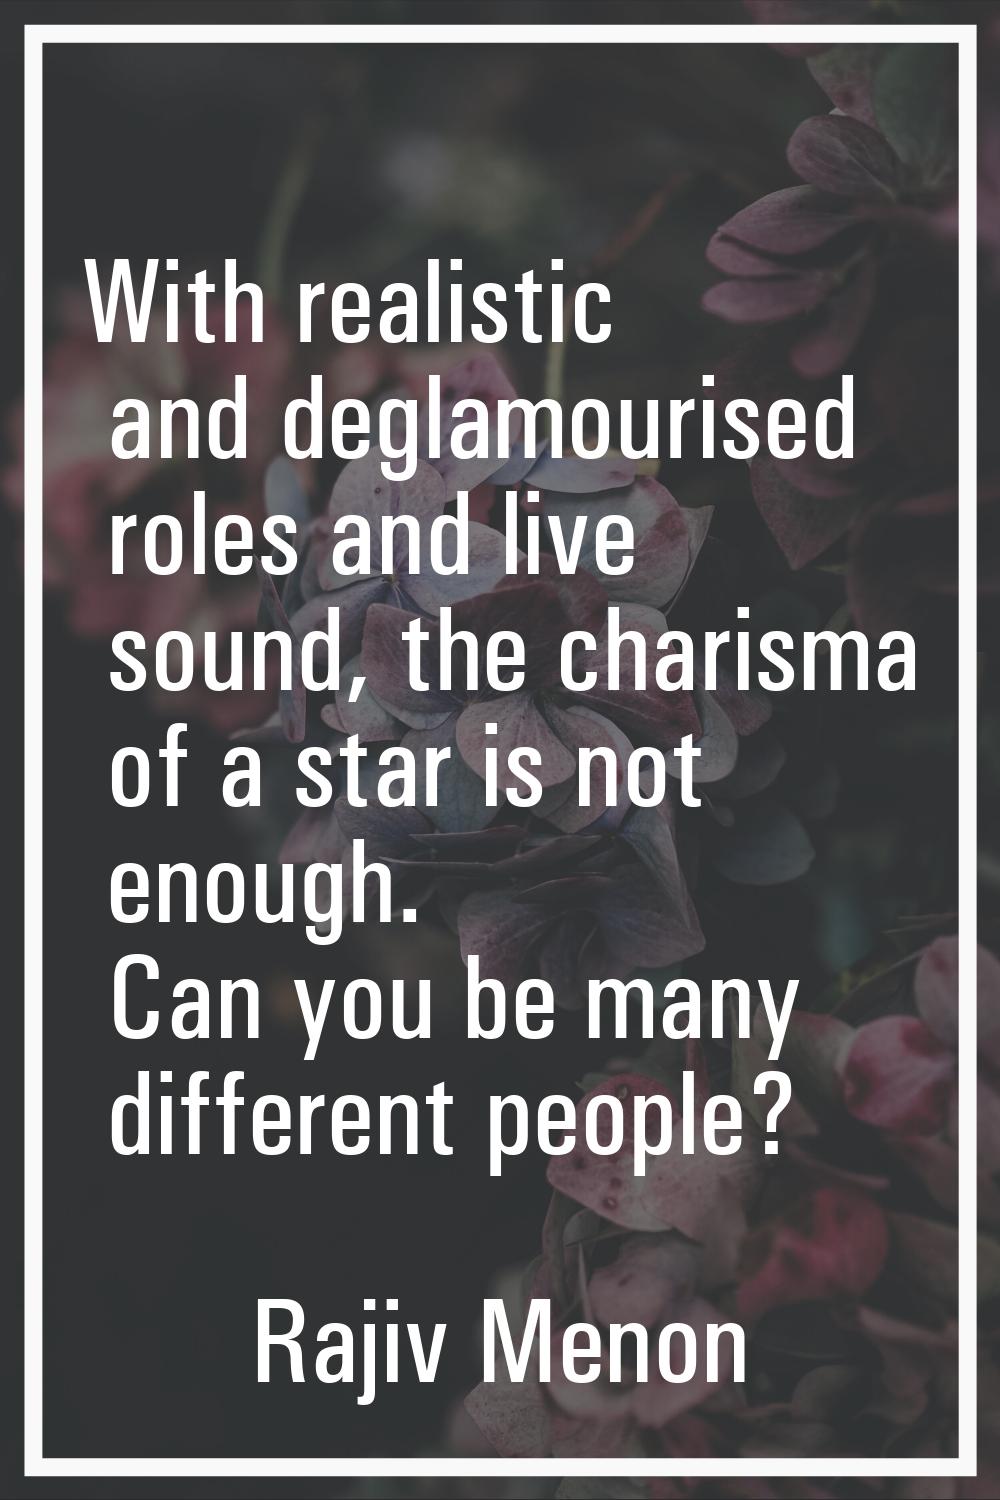 With realistic and deglamourised roles and live sound, the charisma of a star is not enough. Can yo